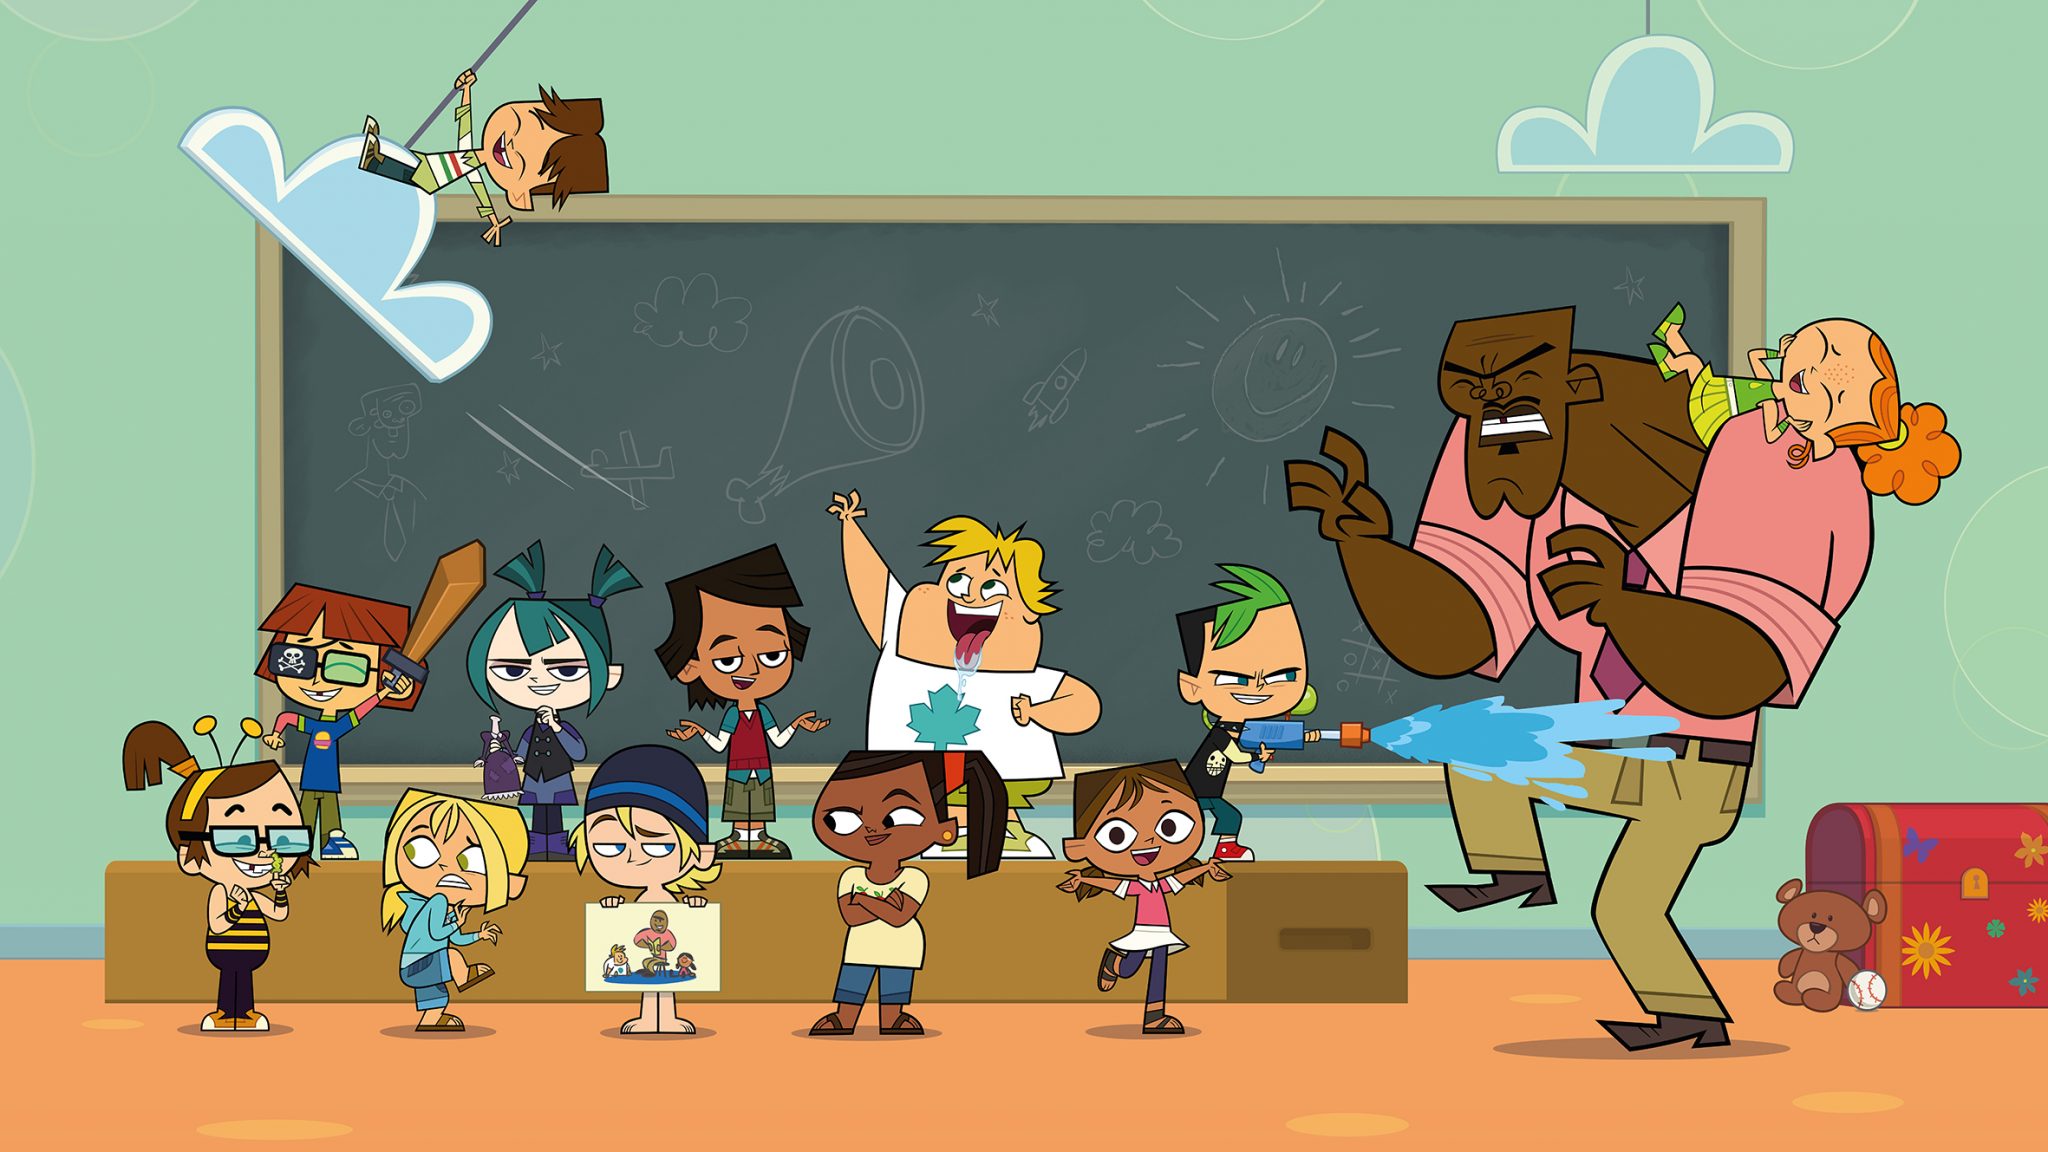 Total Drama Season 5 Scarlett O'Hara Cake Entertainment Scarlett Fever  Television show, others, png | PNGWing